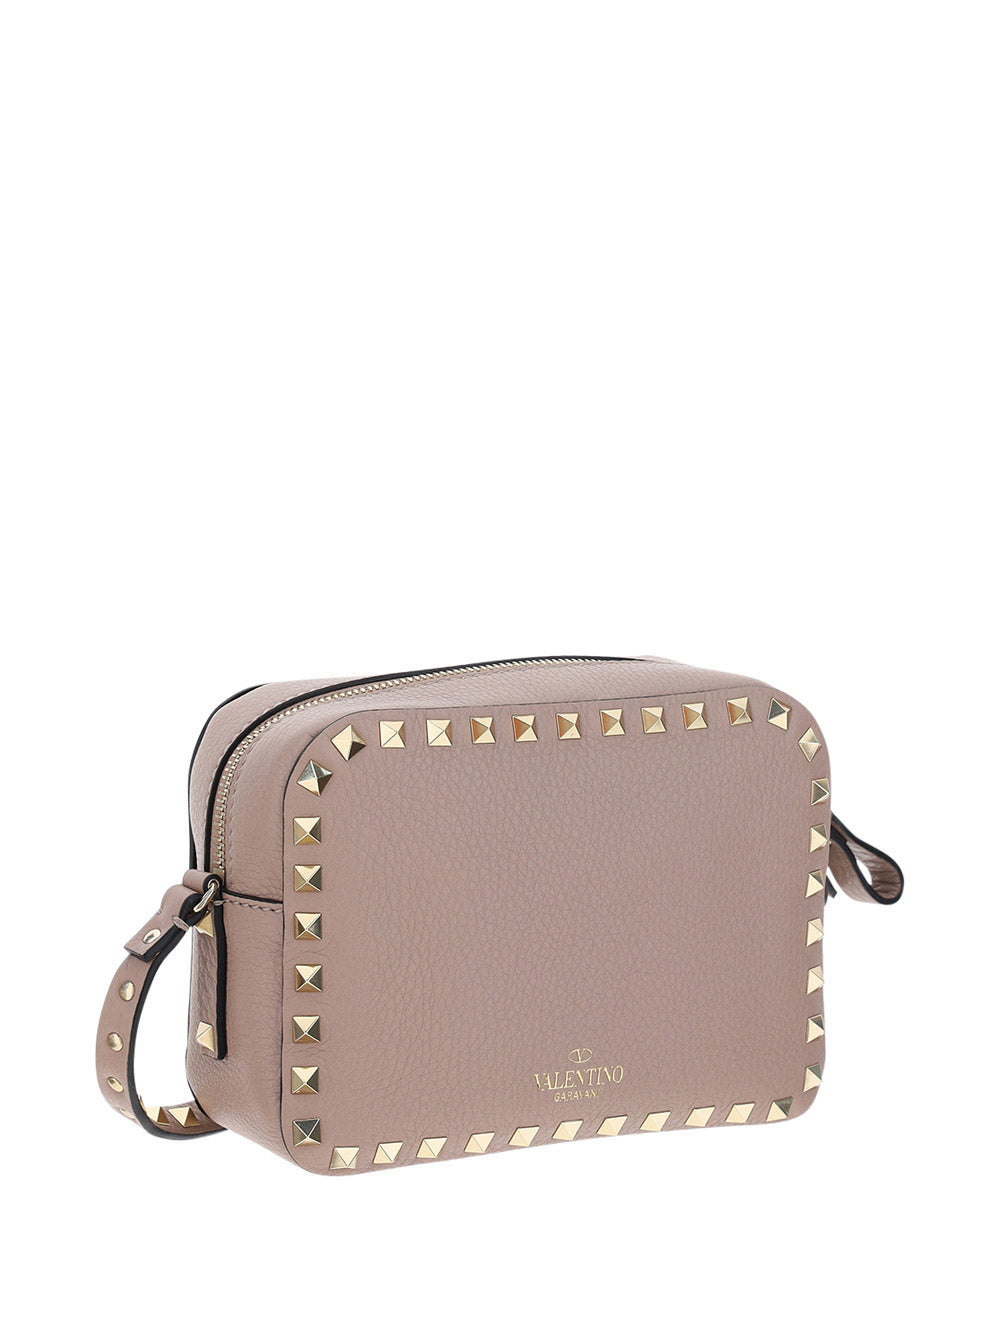 Small Rockstud Grainy Calfskin Crossbody Bag for Woman in Poudre